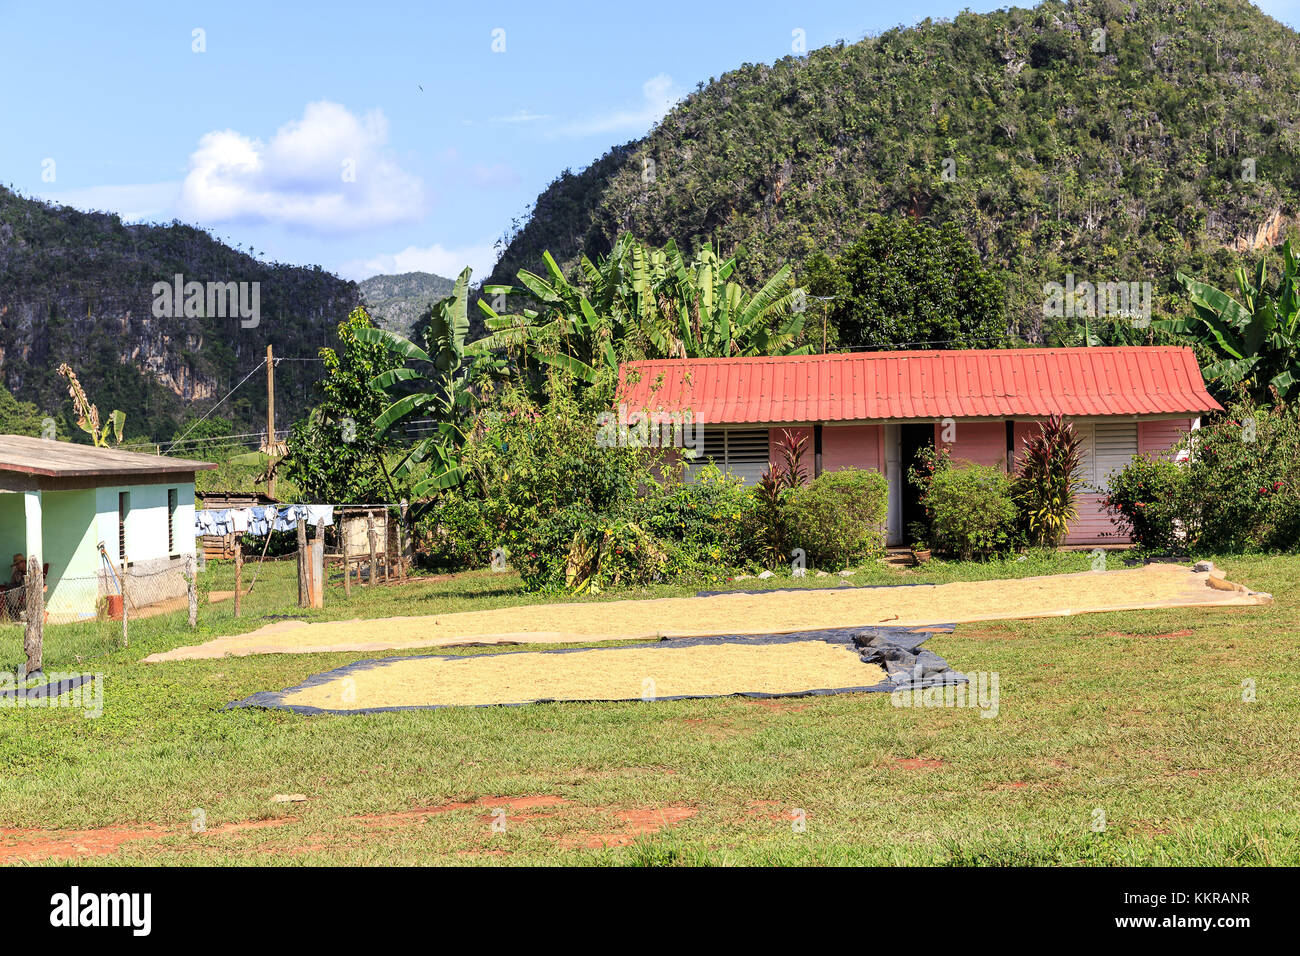 To dry laid grain in the sun in the vinales valley, cuba Stock Photo